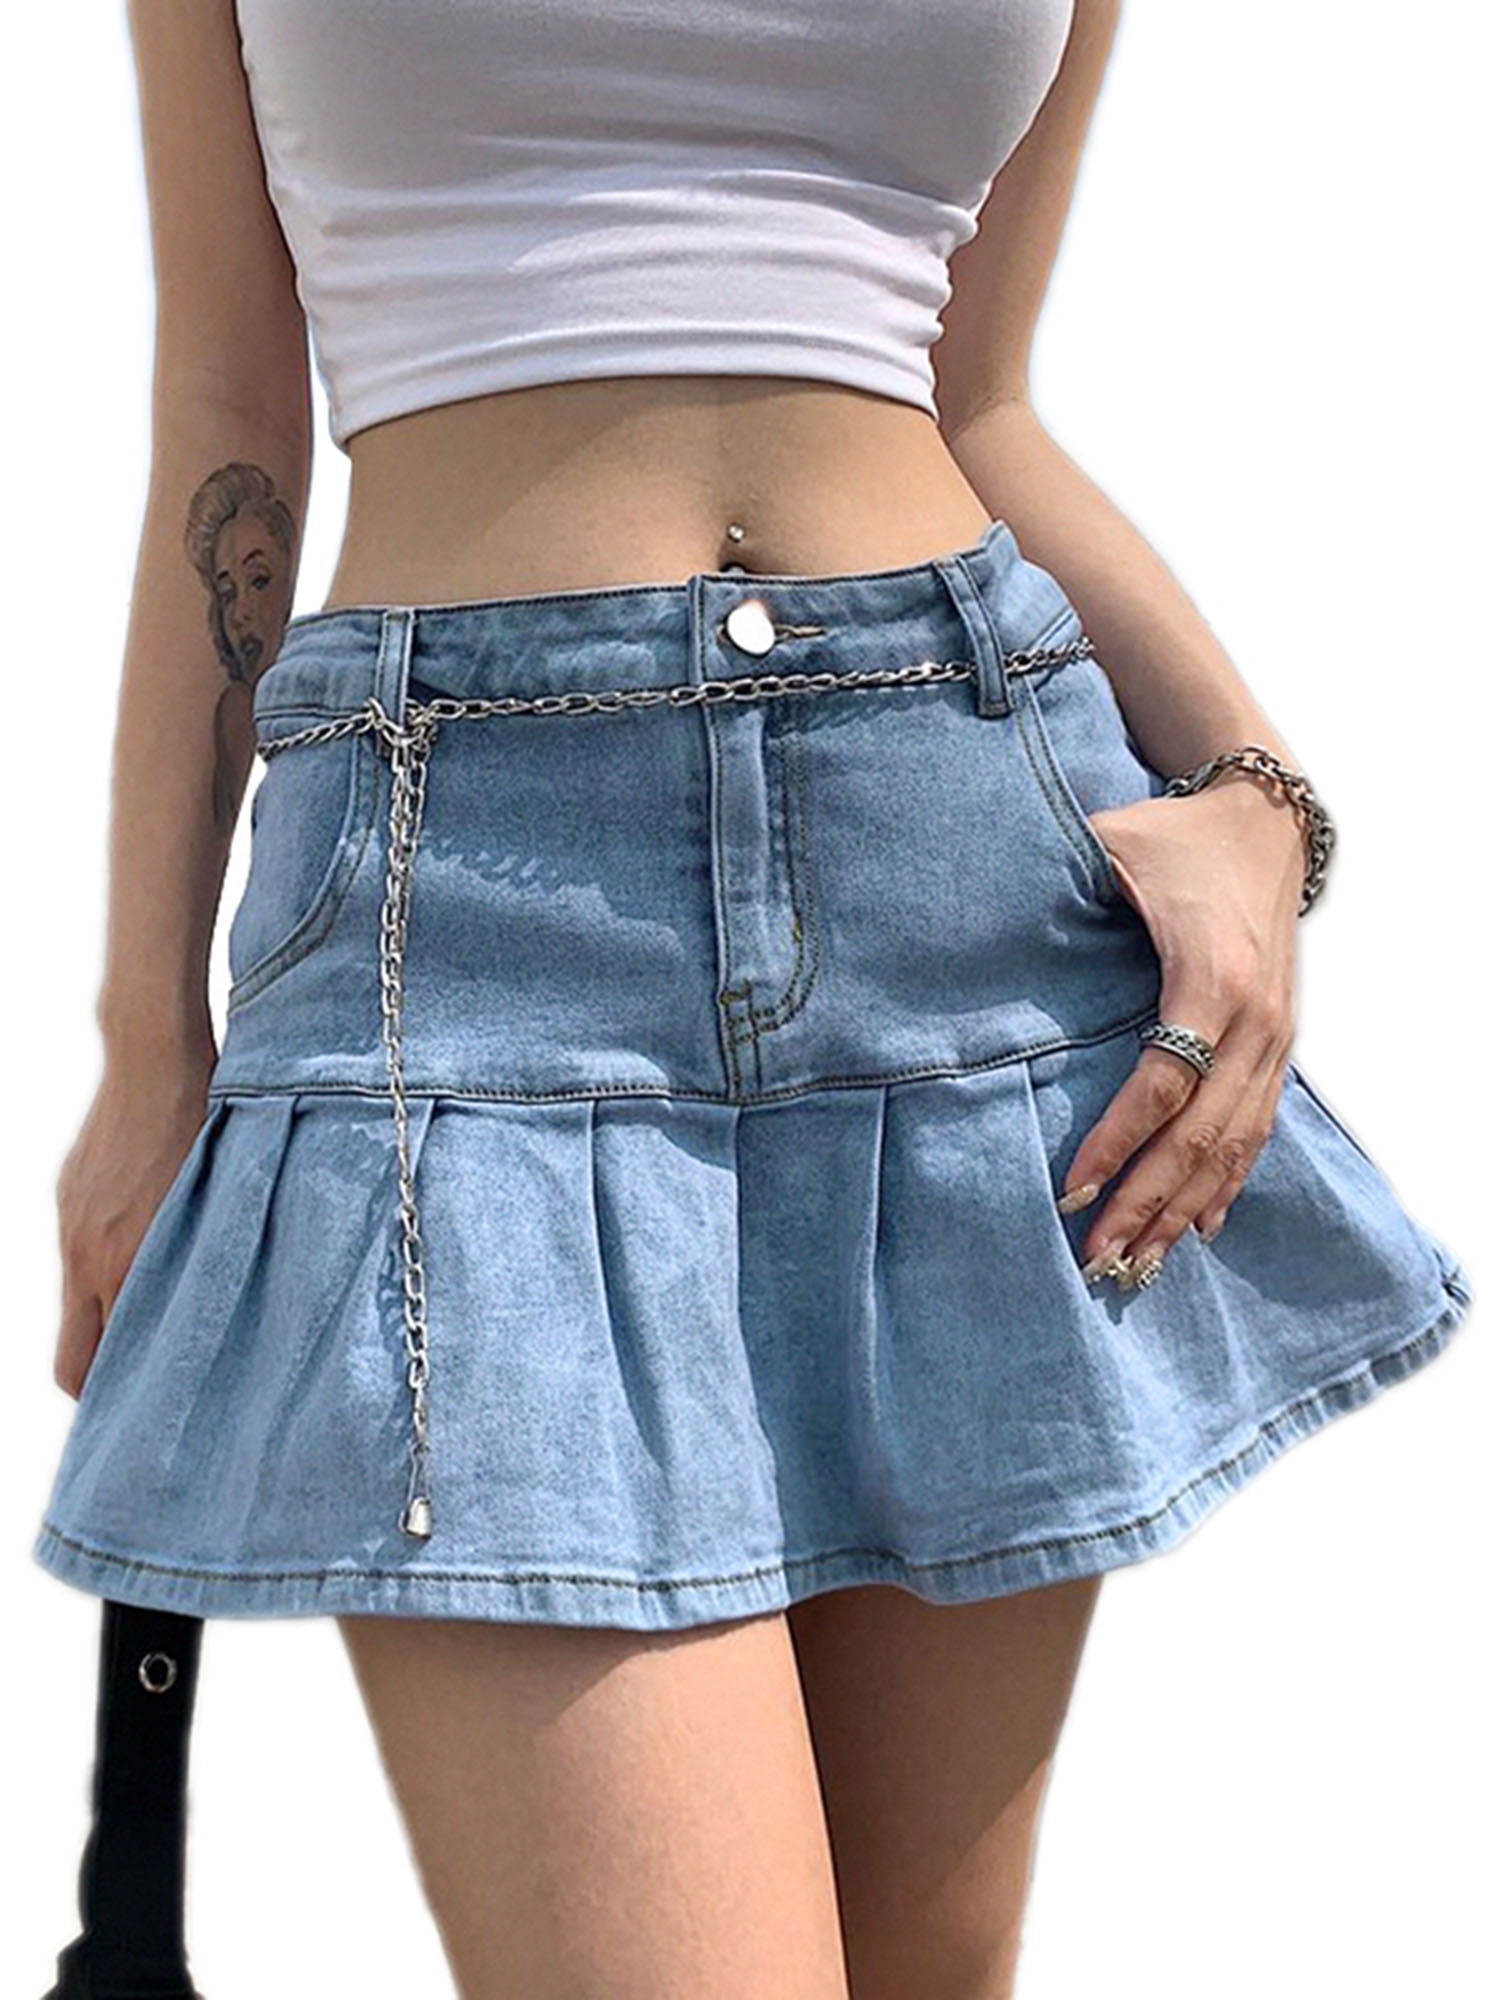 How To Style Your Mini Jeans Skirts And Look Fabulous. (Photos) | Boombuzz